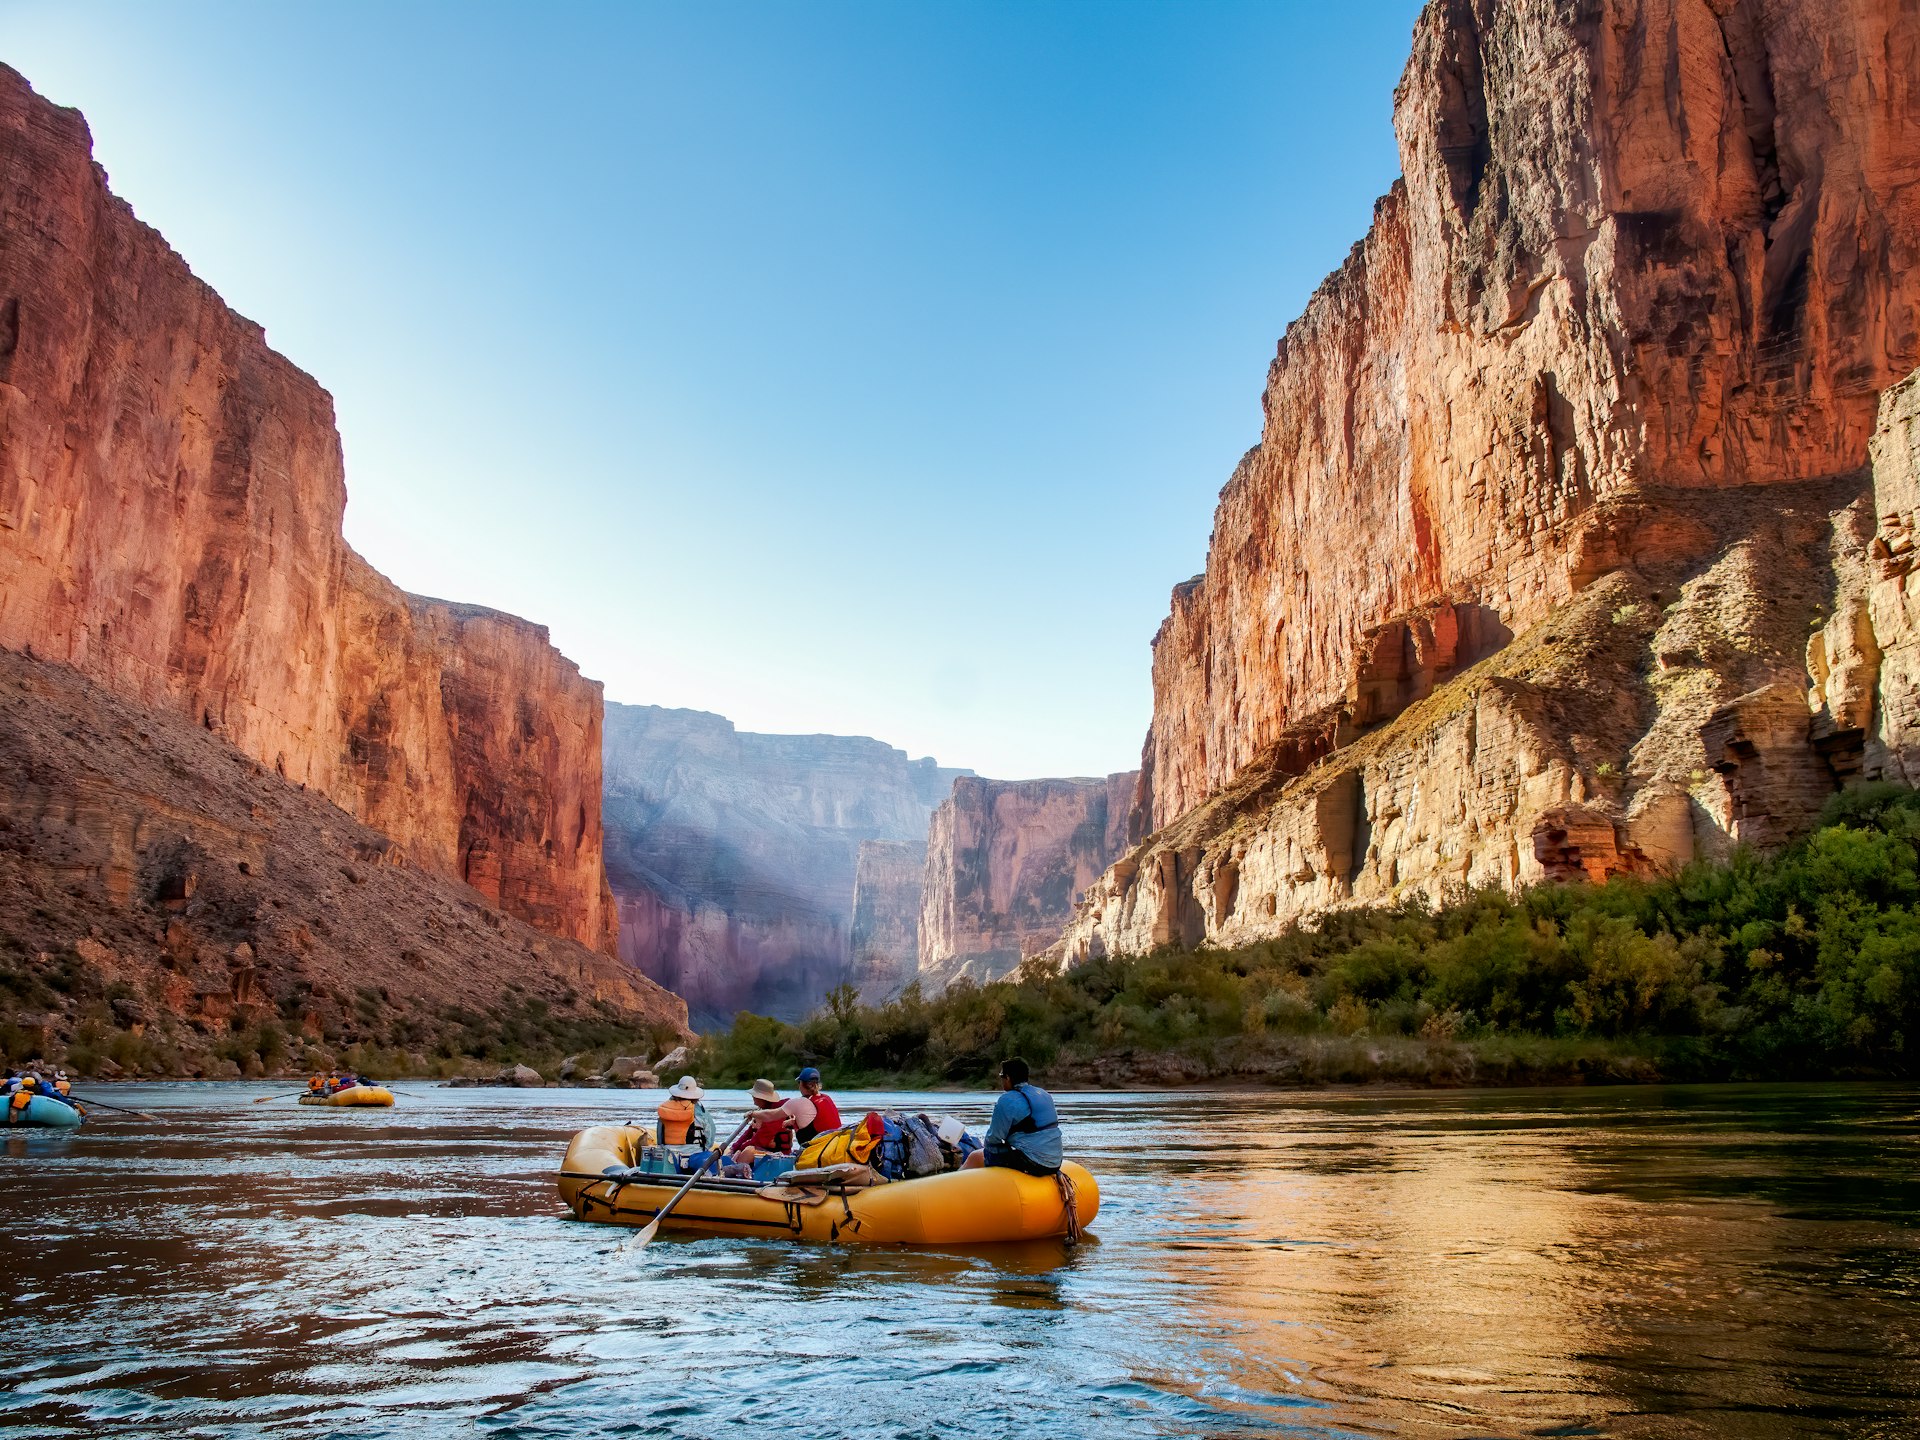 Rafting at sunrise on the Colorado River in the Grand Canyon, Arizona, USA